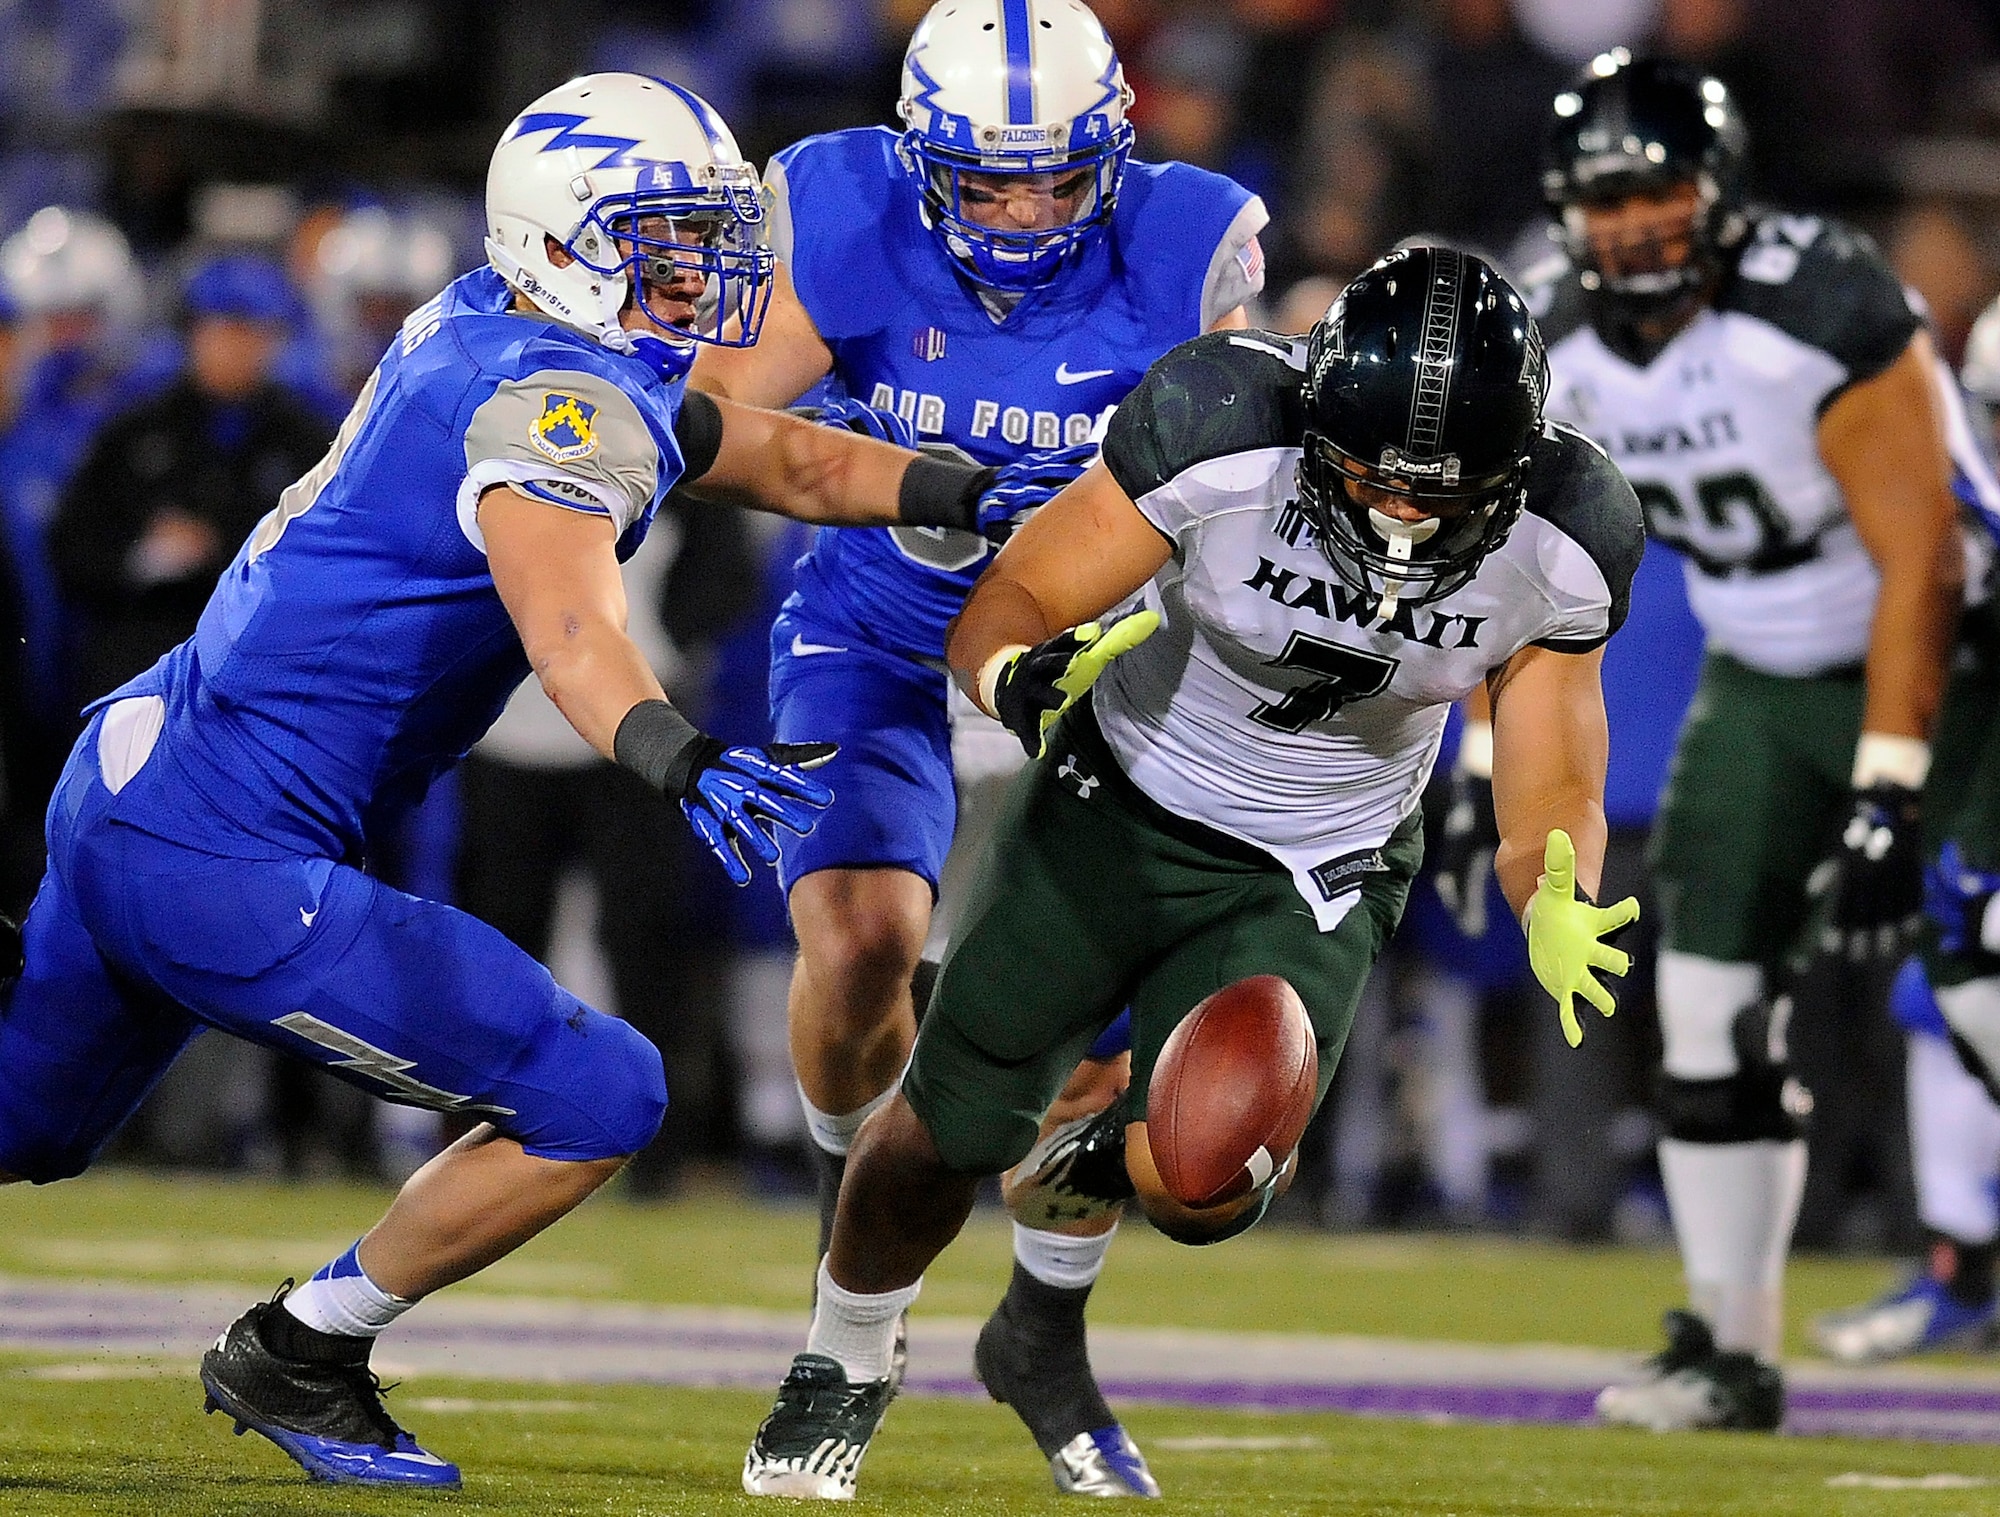 Hawai'i running back Joey Iosefa loses a fumble in the third quarter of the Air Force-Hawai'i game at Falcon Stadium Nov. 16, 2012. The Falcons defeated the Warriors, 21-7, without throwing a single pass. (U.S. Air Force photo/Mike Kaplan)